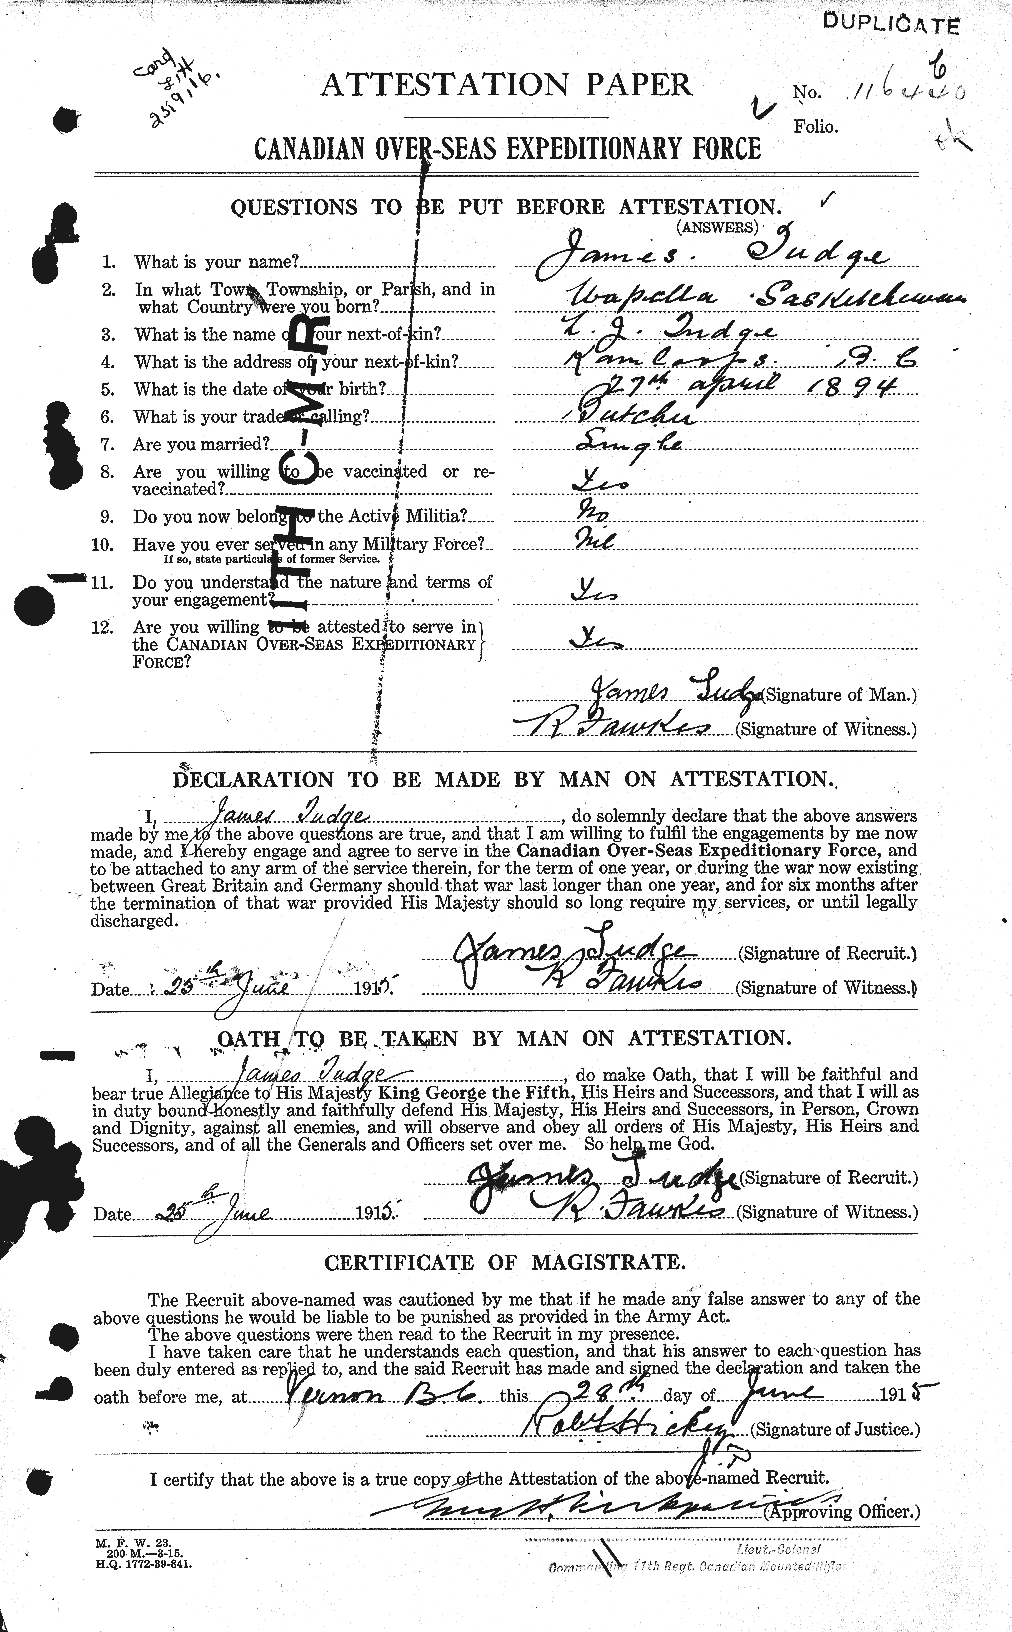 Personnel Records of the First World War - CEF 642931a